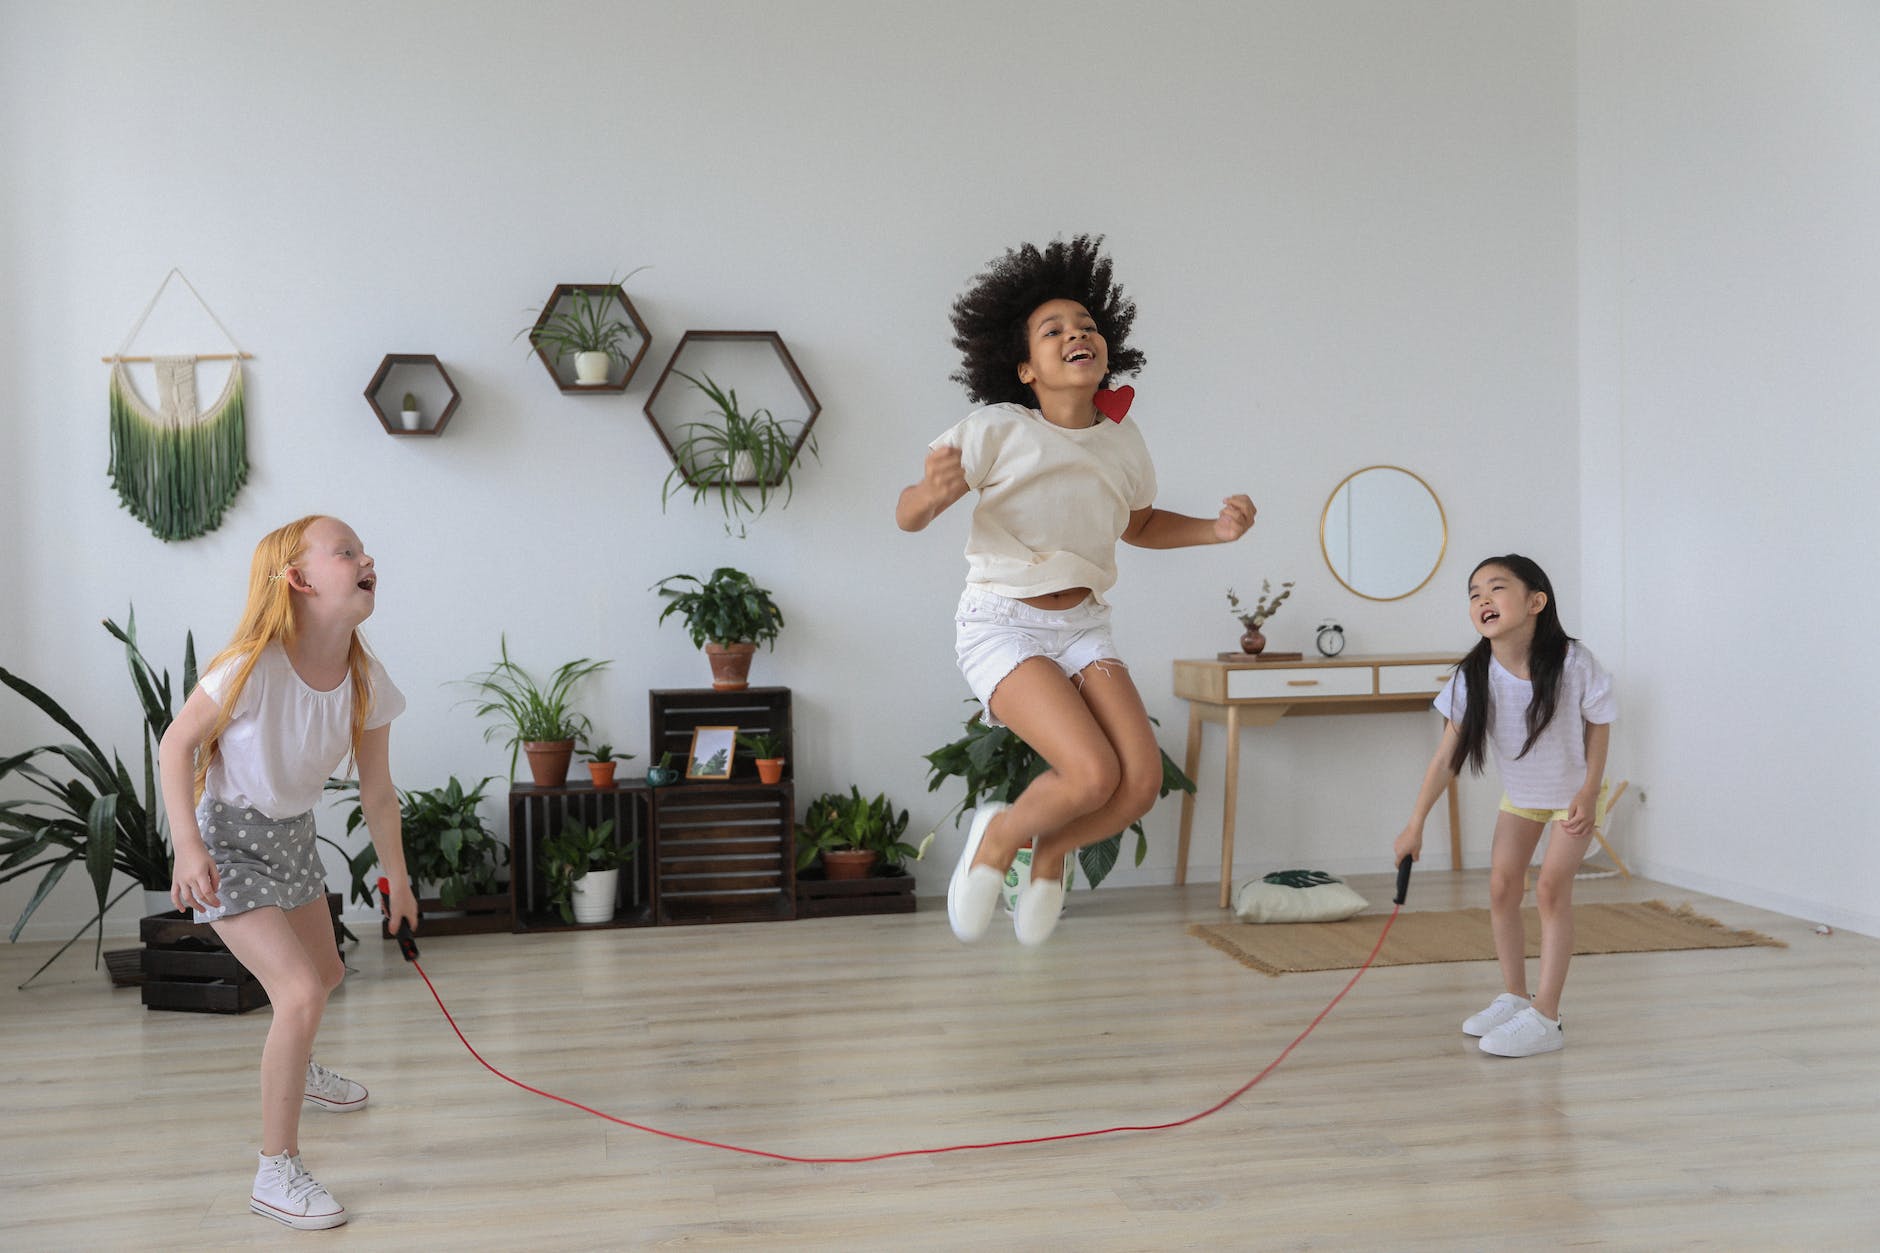 black girl jumping over rope while playing with friends fun ways to exercise